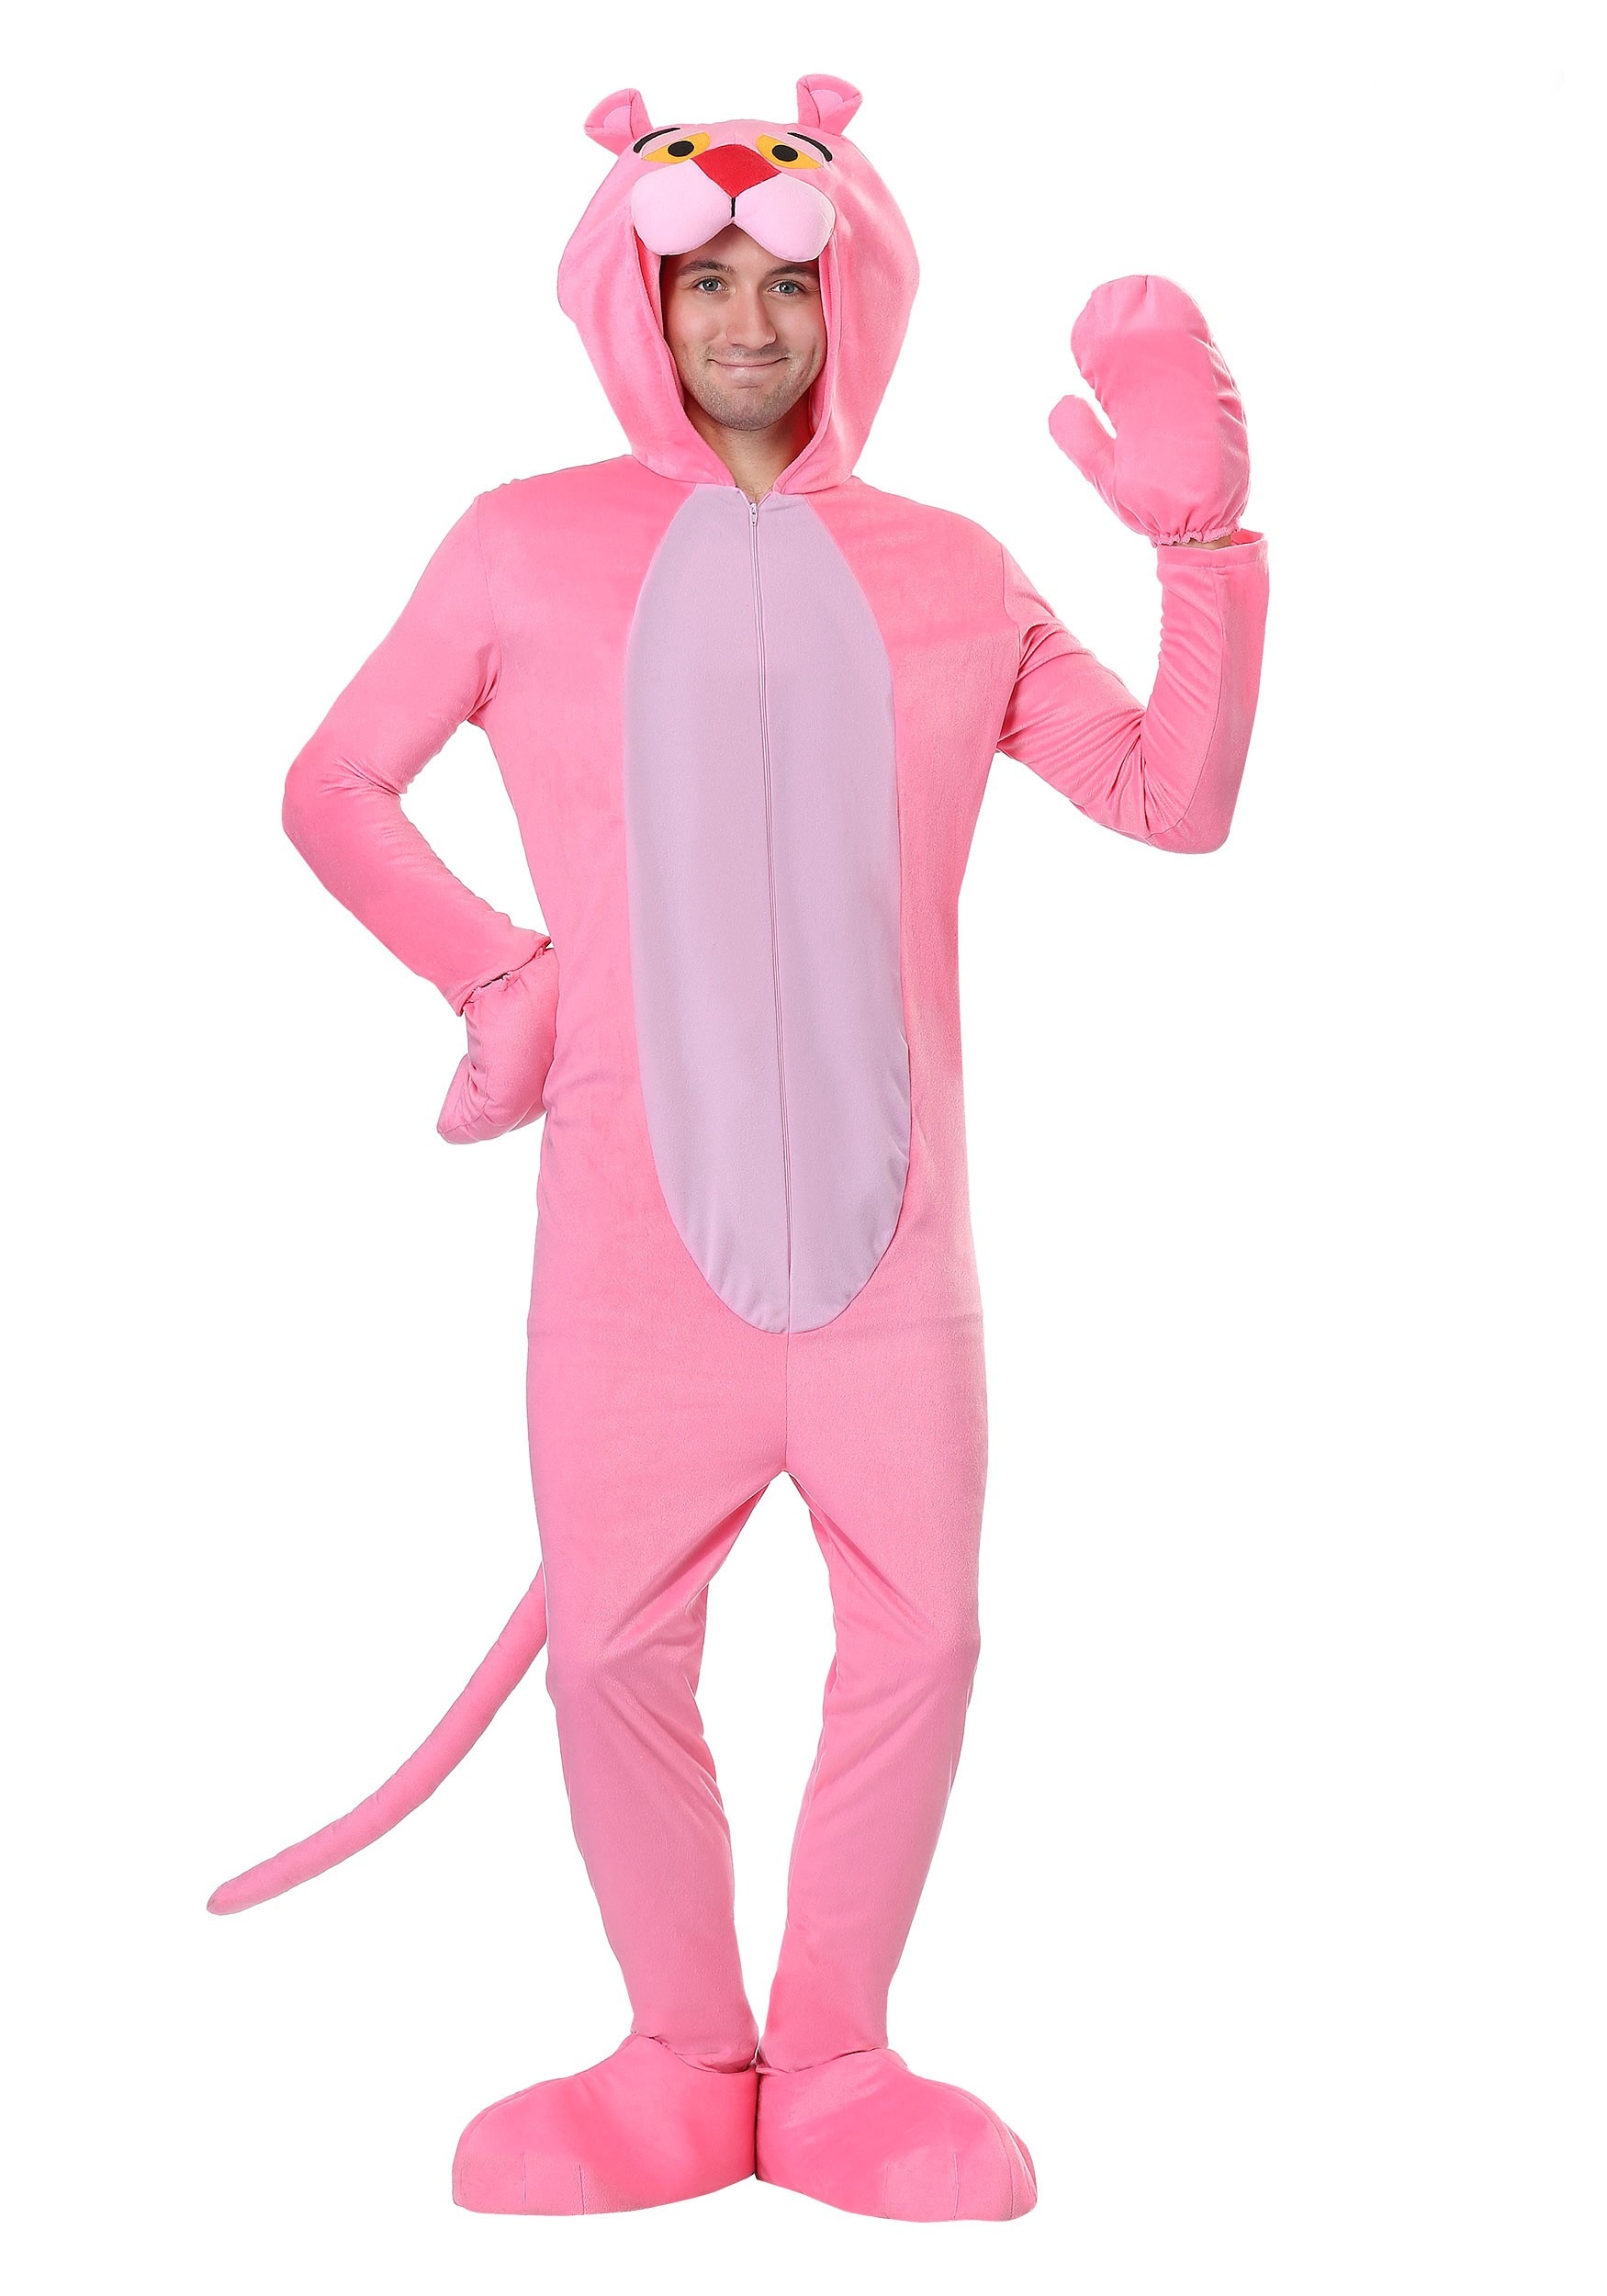 The Pink Panther Plus Size Adult Costume